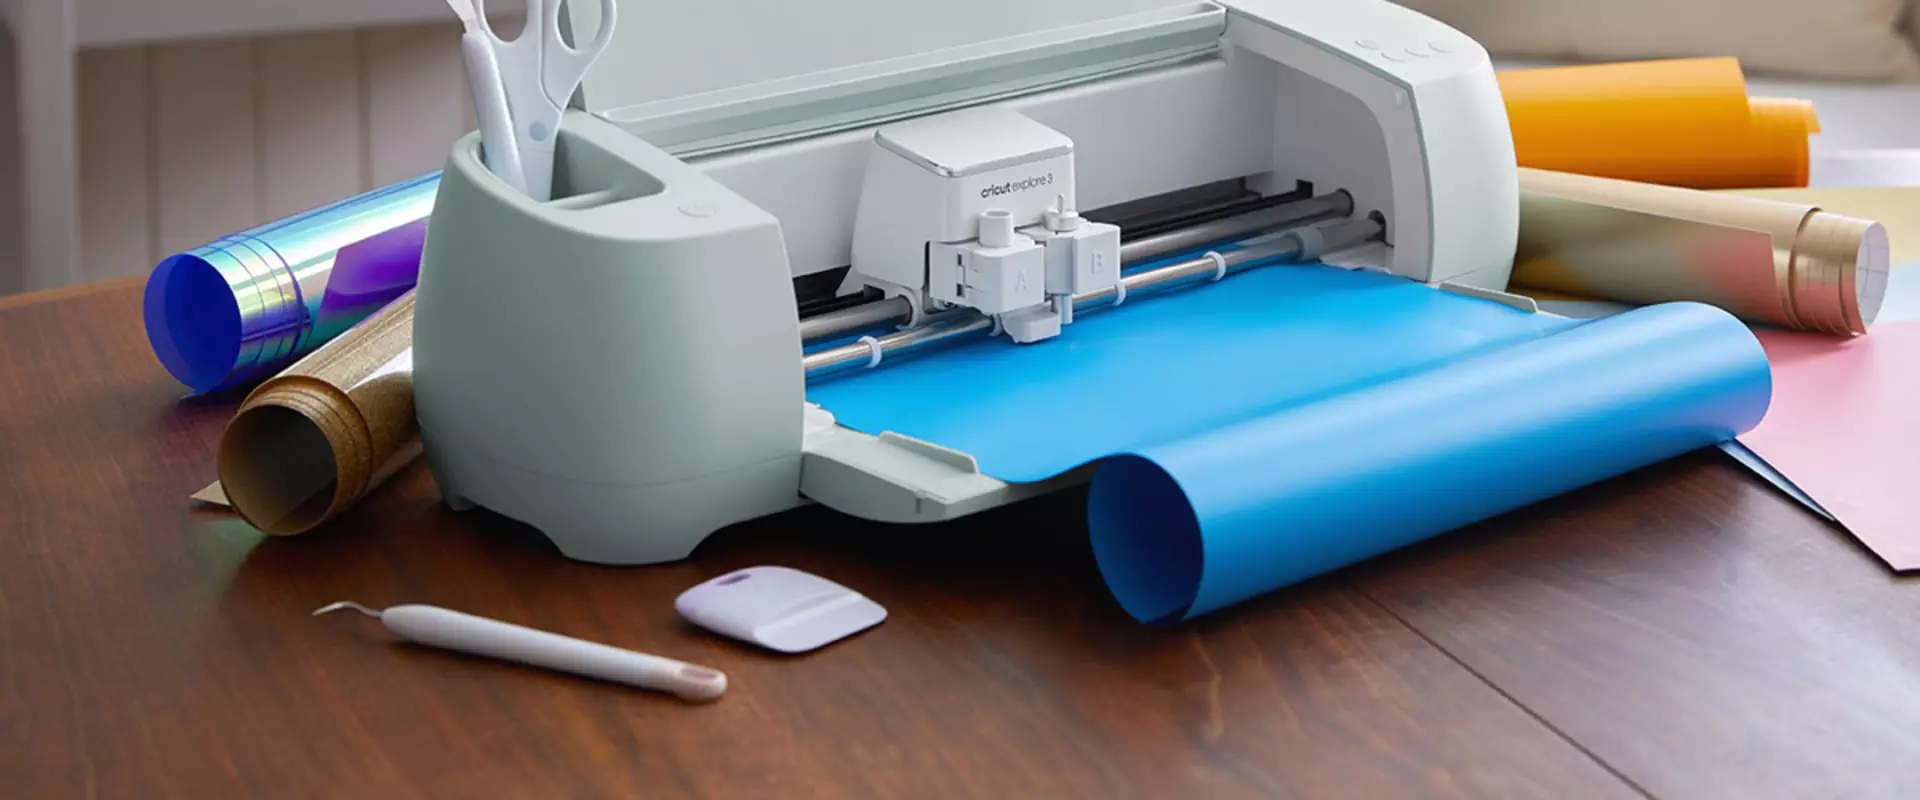 What is the most useful cricut machine?